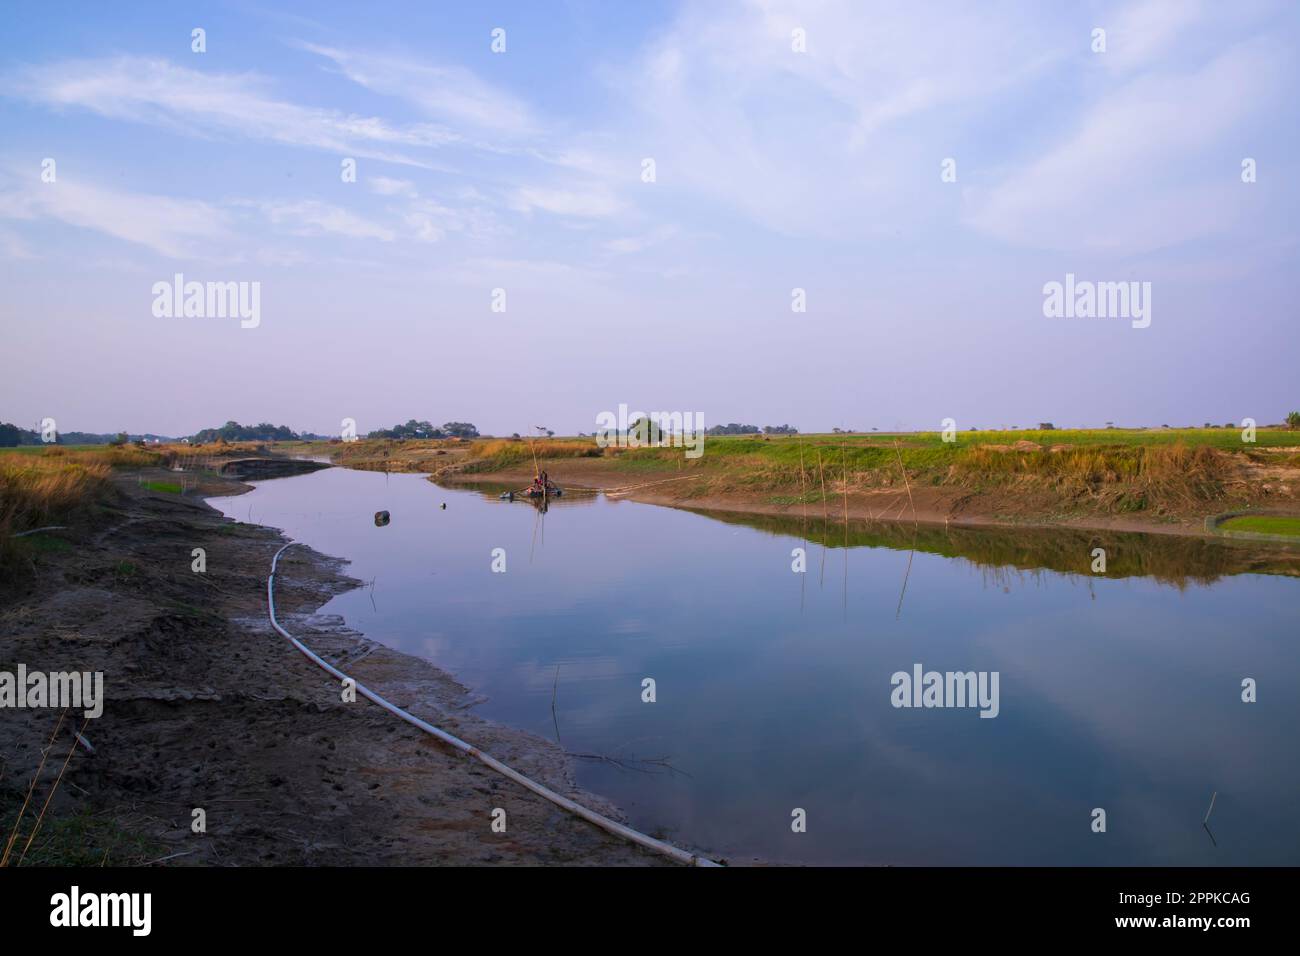 Arial View Canal with green grass and vegetation reflected in the water nearby Padma river in Bangladesh Stock Photo